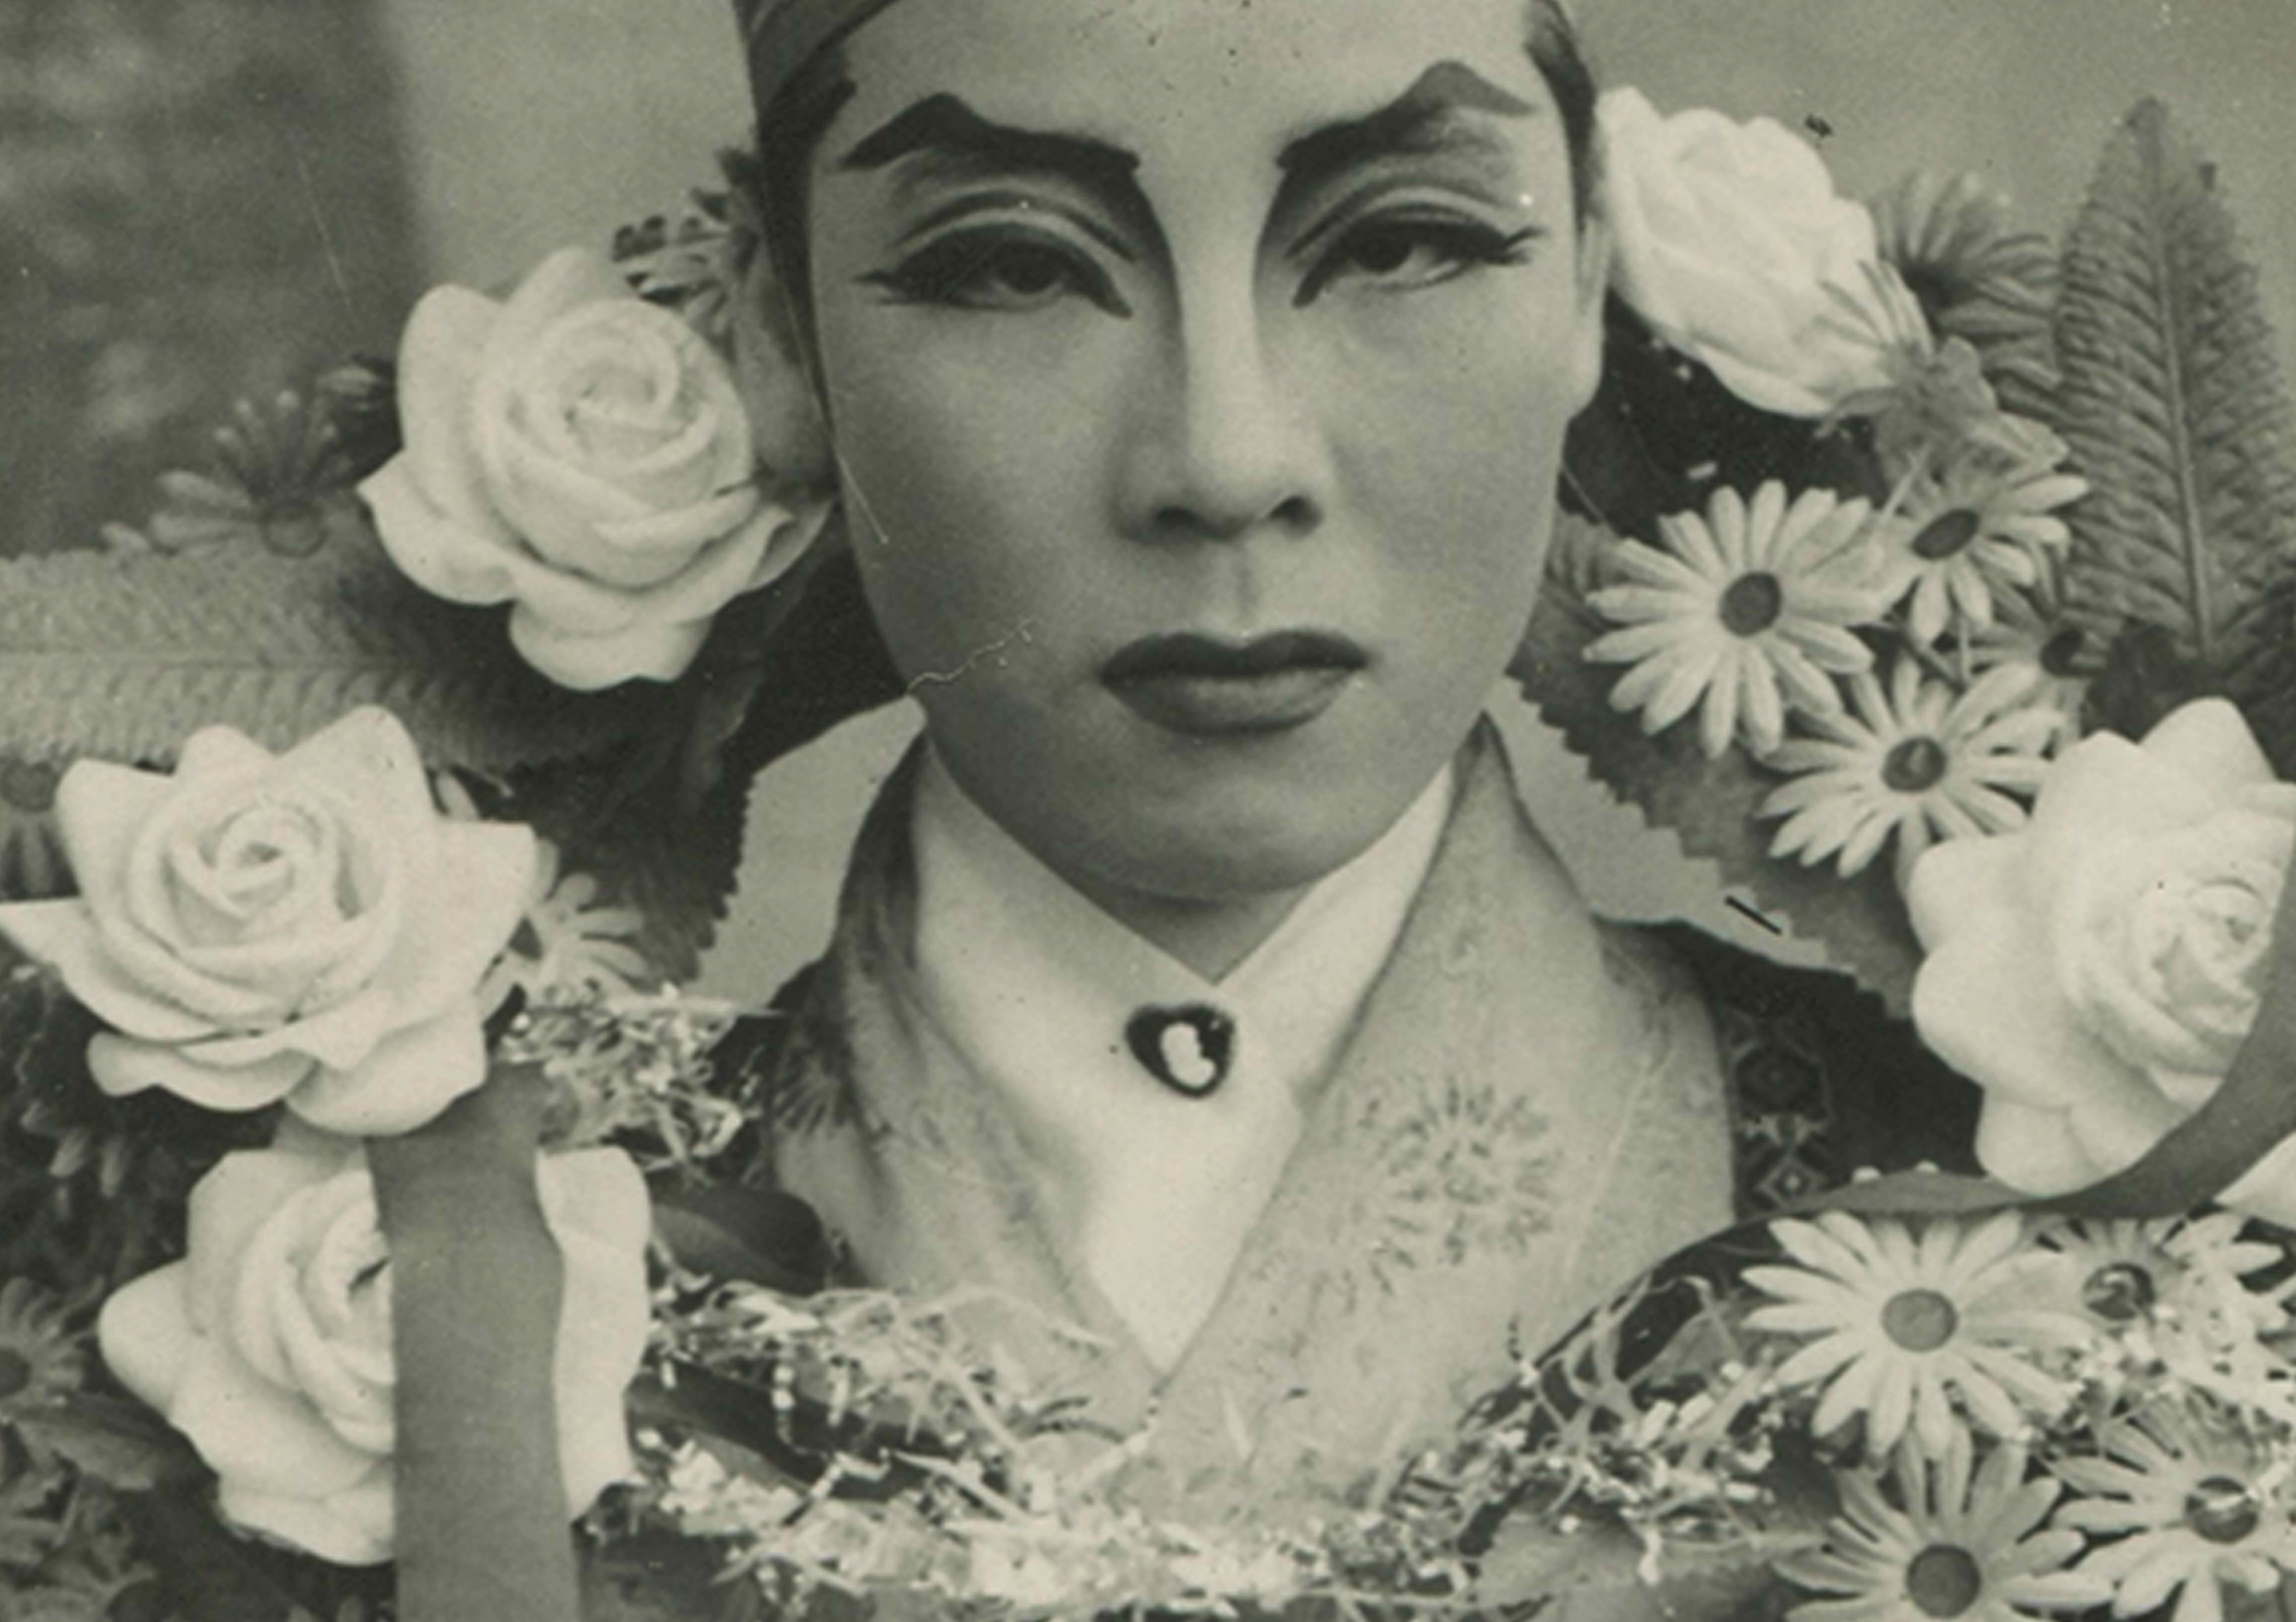 A gray-scale photograph of a Yeoseong Gukgeuk (National Women's Theater) performer gazing forward with prominent makeup. There is a wreath of flowers hanging behind their head and around their chest.